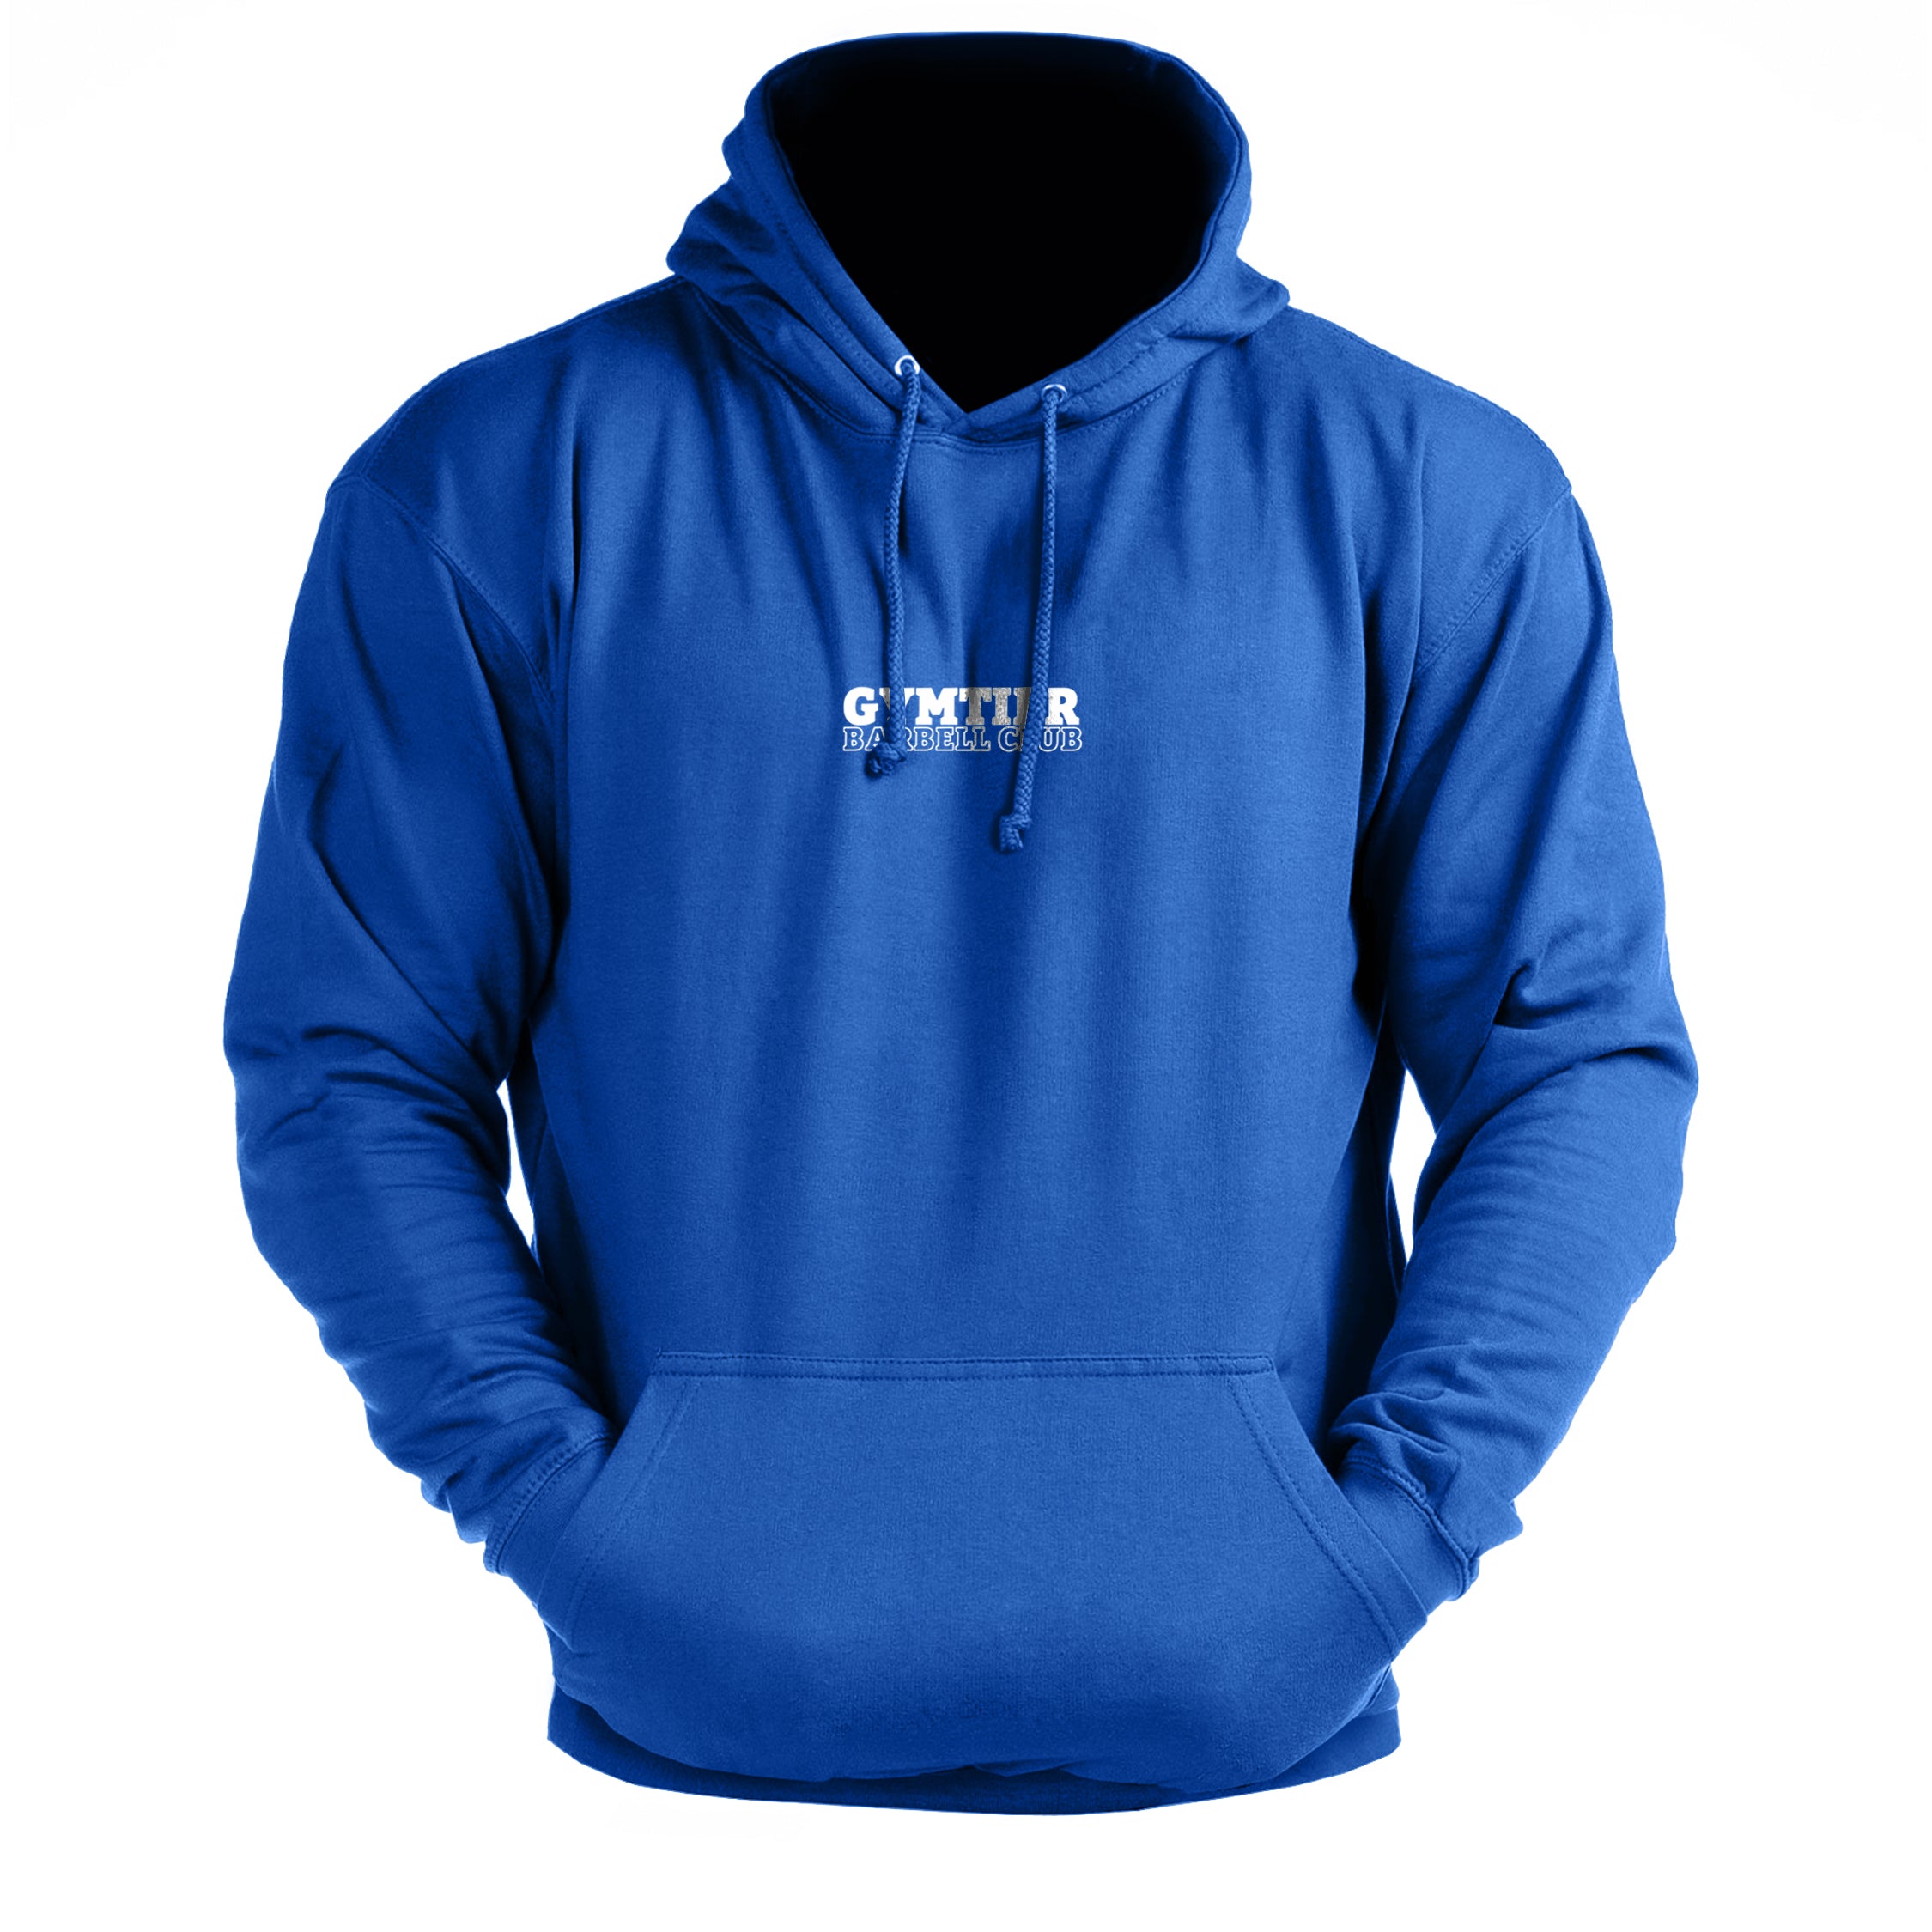 Gymtier Barbell Club - Chest - Gym Hoodie